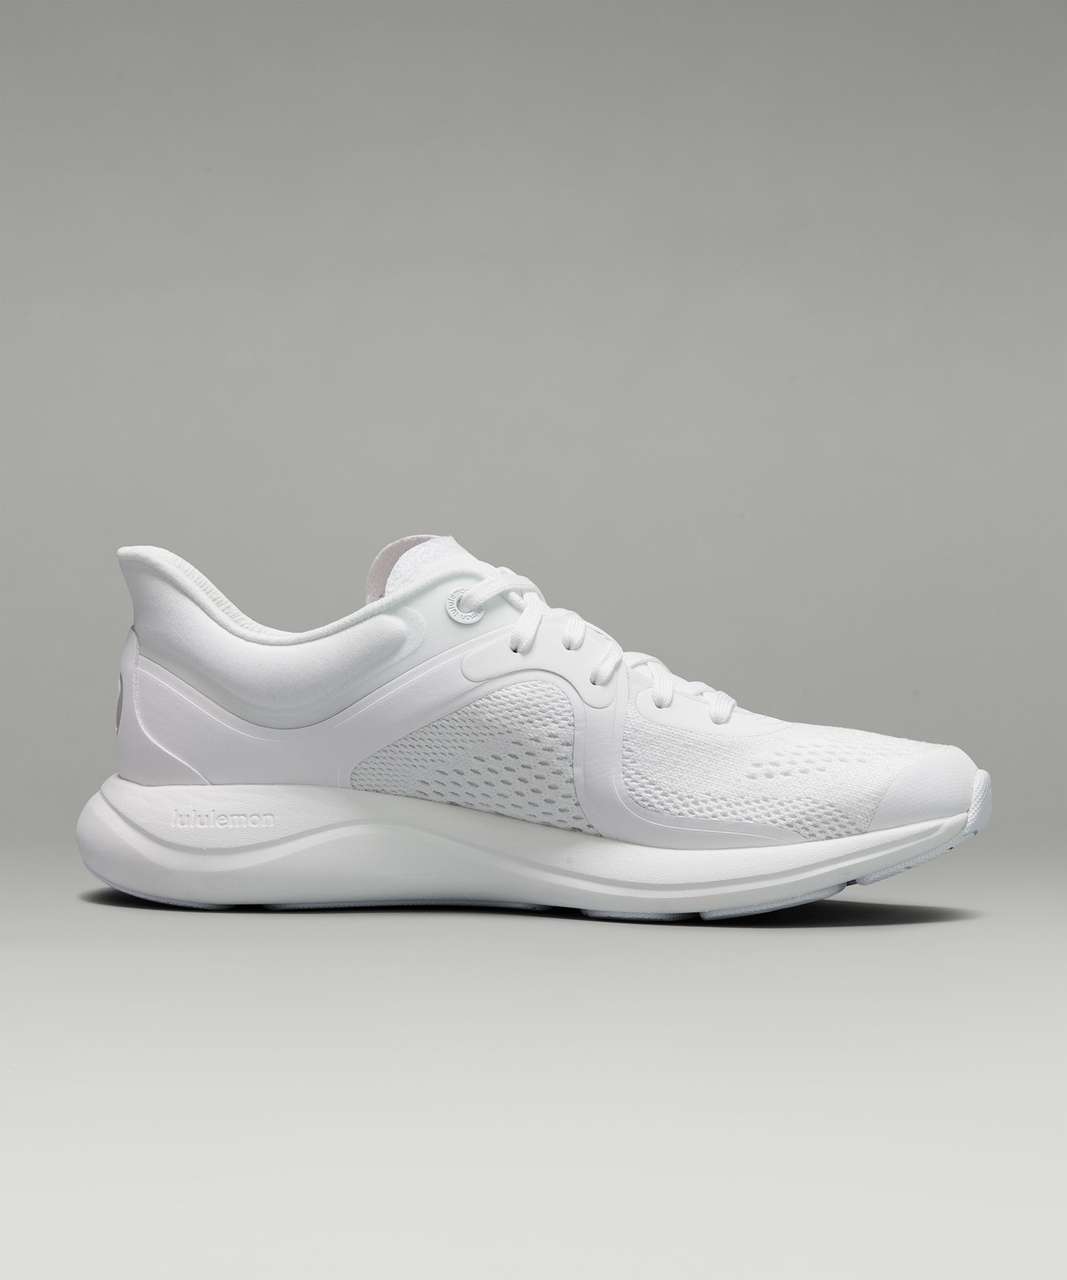 Lululemon Chargefeel Low Womens Workout Shoe - White / White / Silver Drop